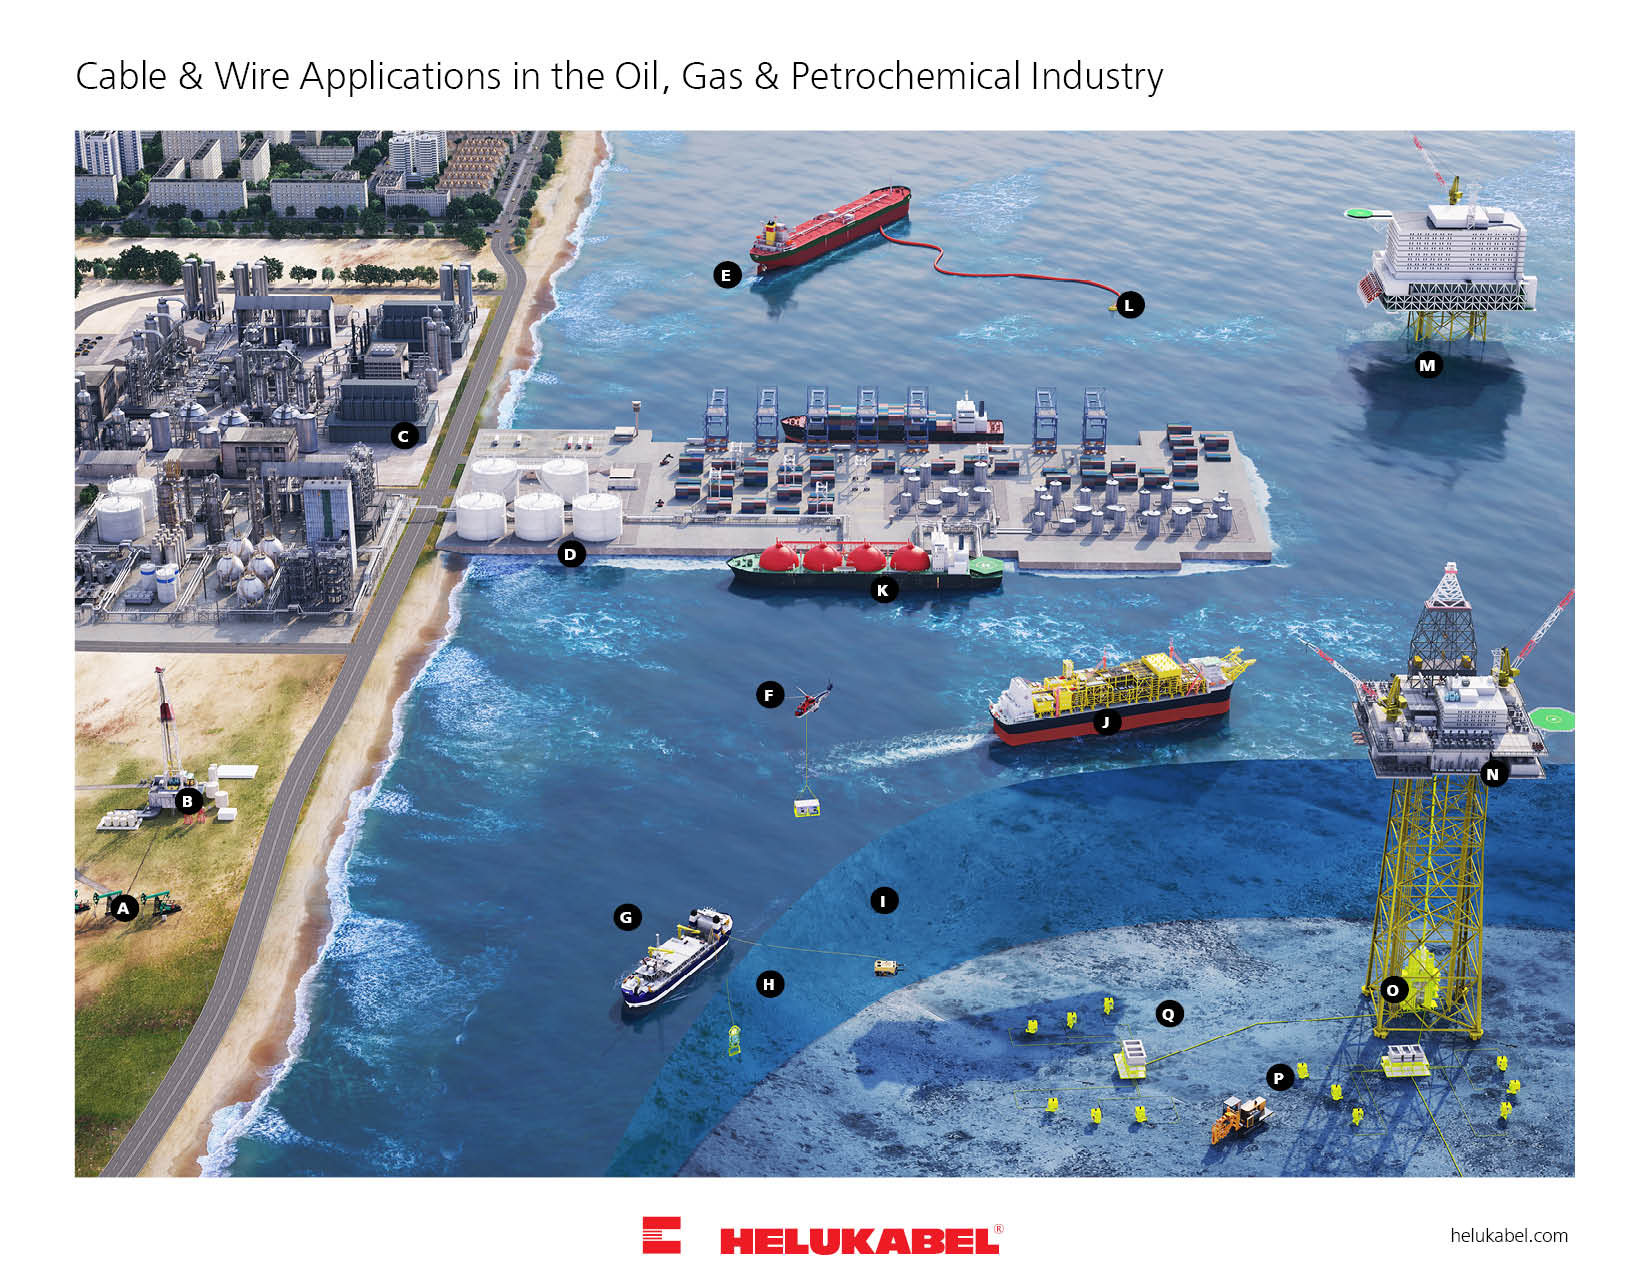 Cables, Wires & Accessories in the Oil, Gas & Petrochemical Industry